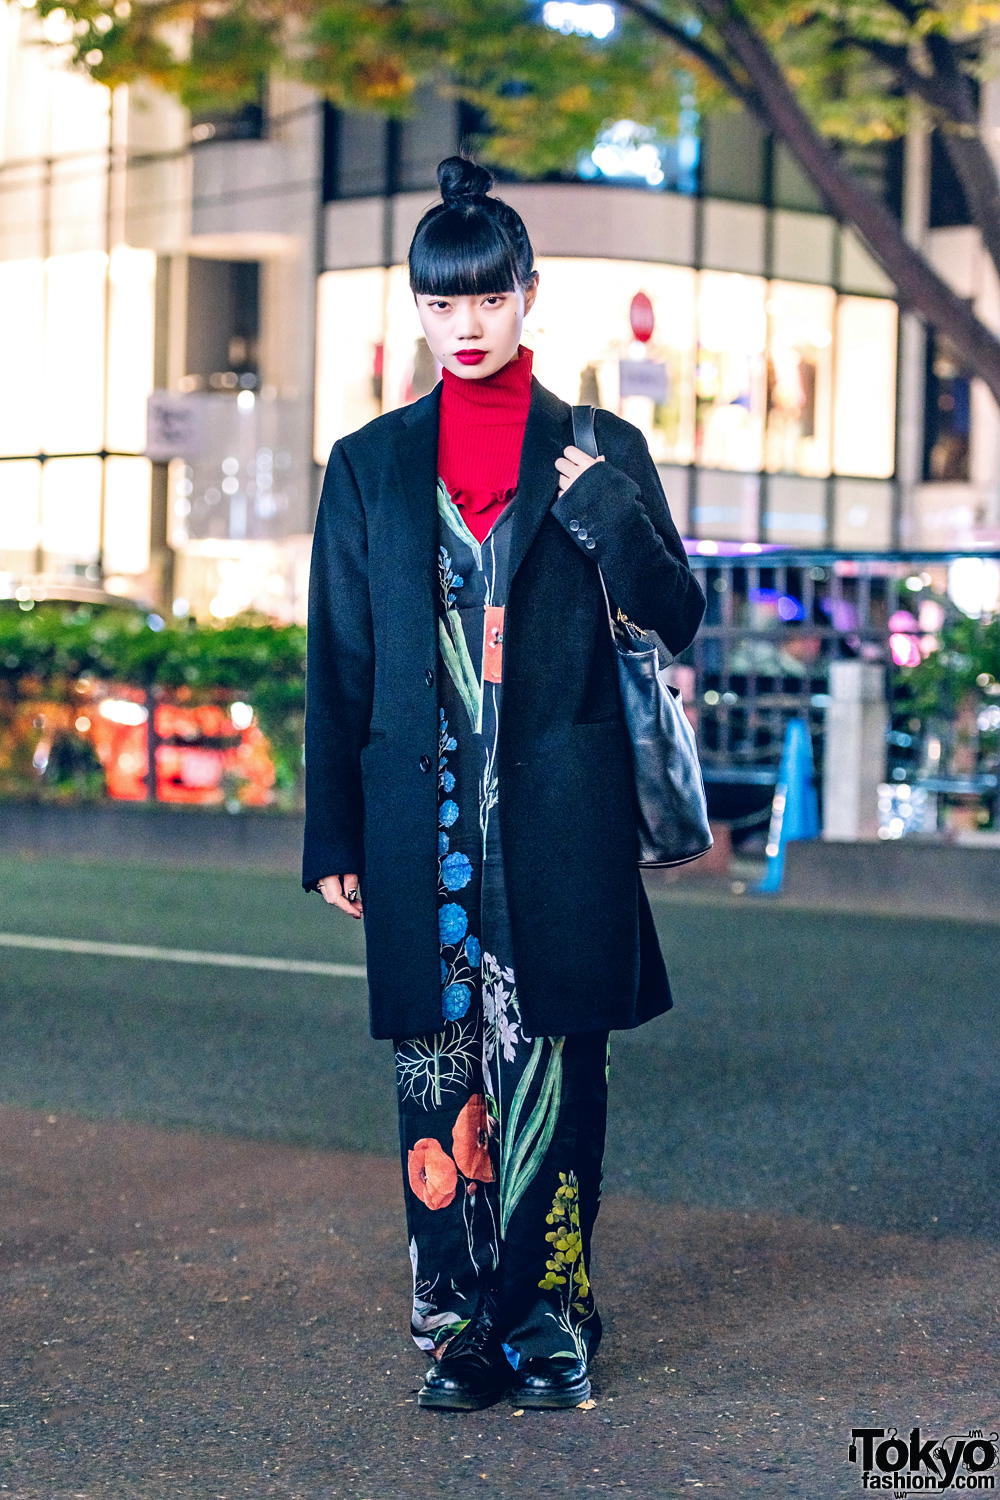 Nylon Japan Blogger in Chic Streetwear Style w/ UNIQLO Coat, Ahcahcum.Muchacha Floral Jumpsuit, Turtleneck, Coach Leather Tote & Dr. Martens